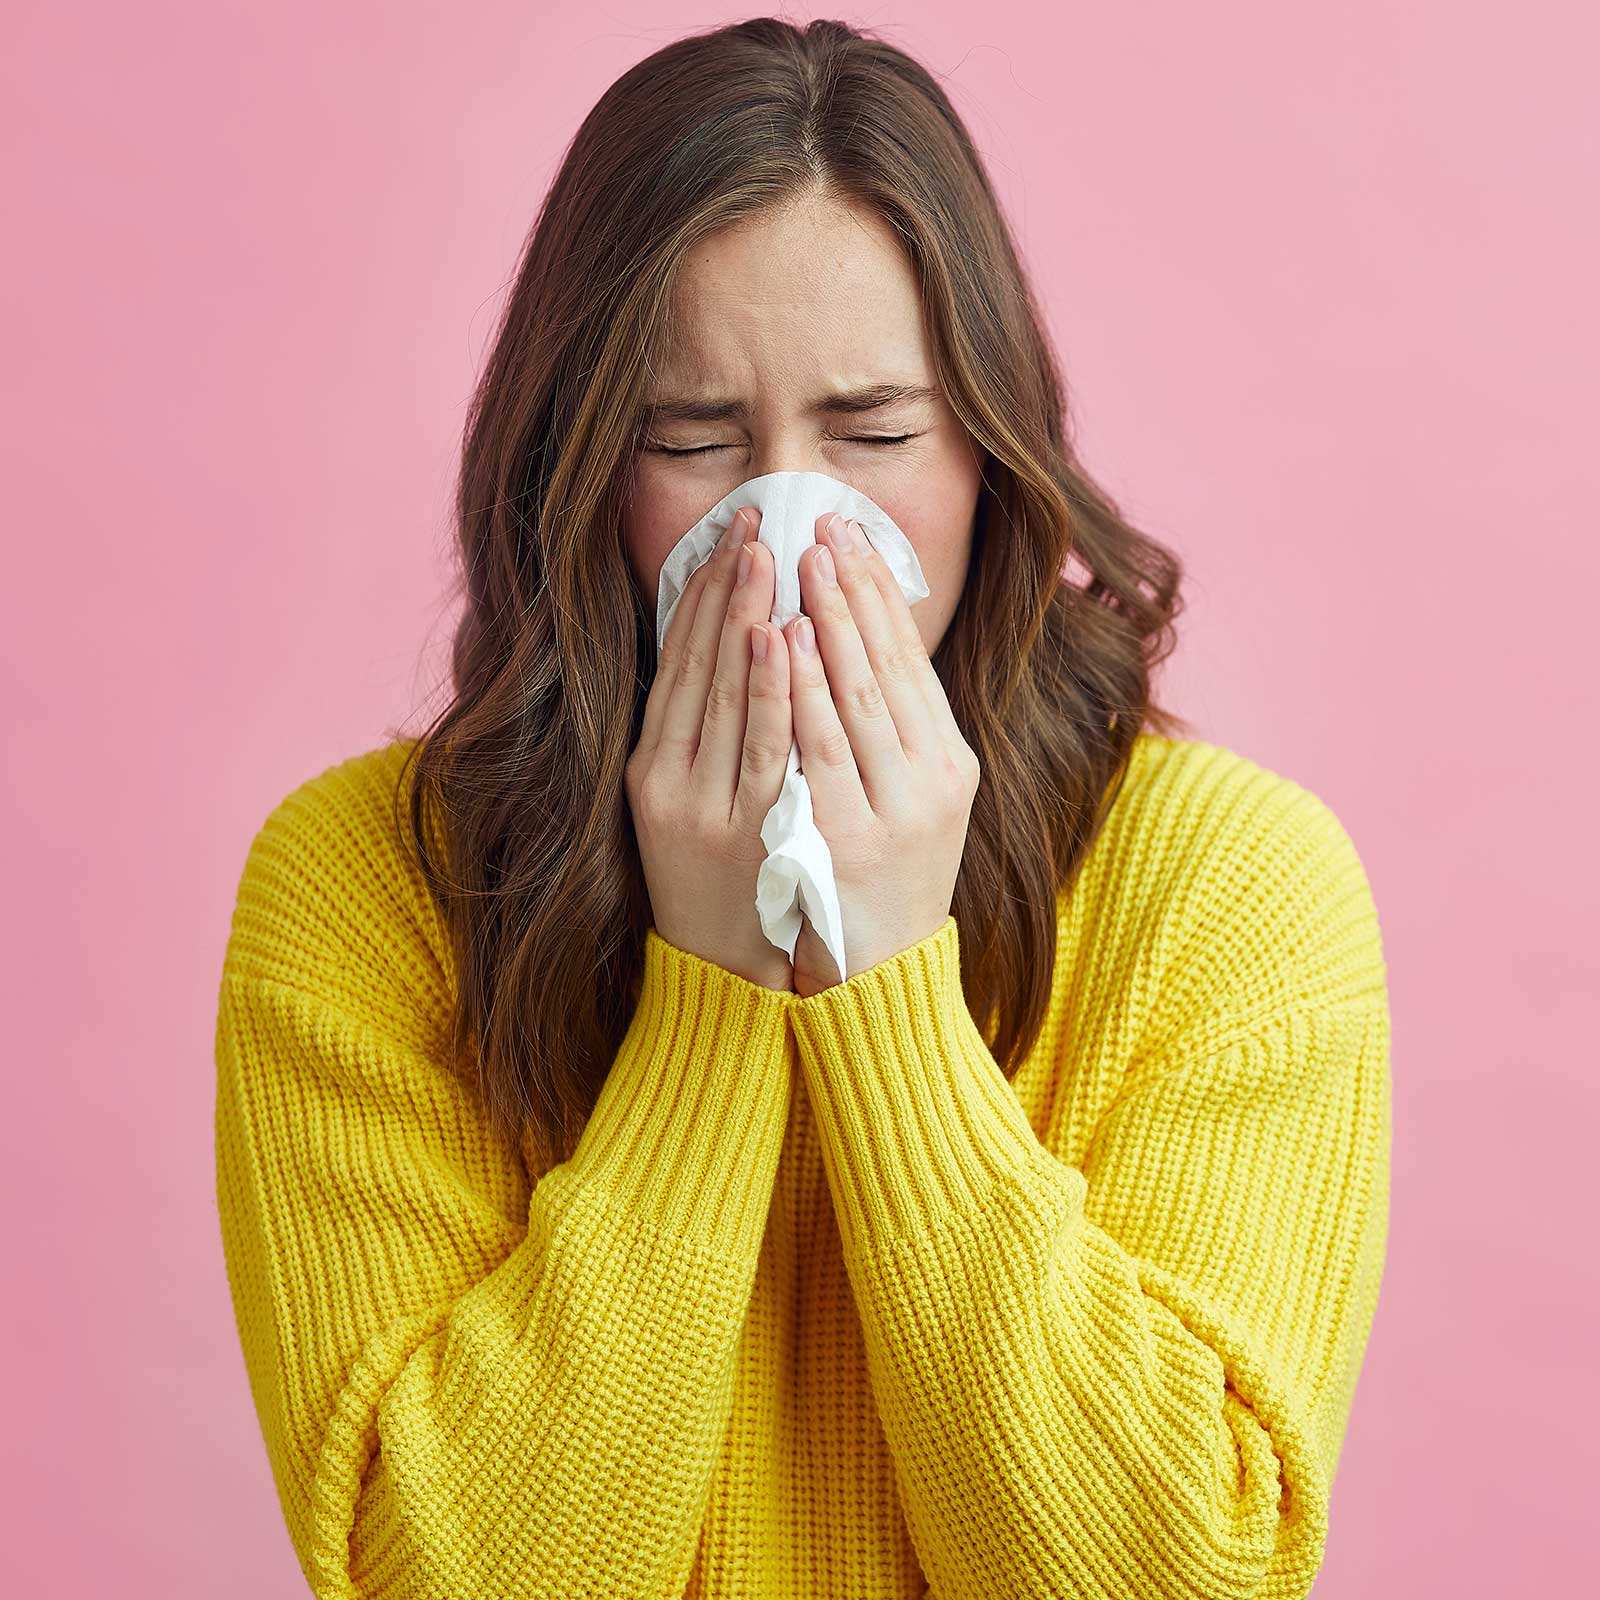 Woman in yellow jumper sneezing. Covers mouth and nose with a tissue.